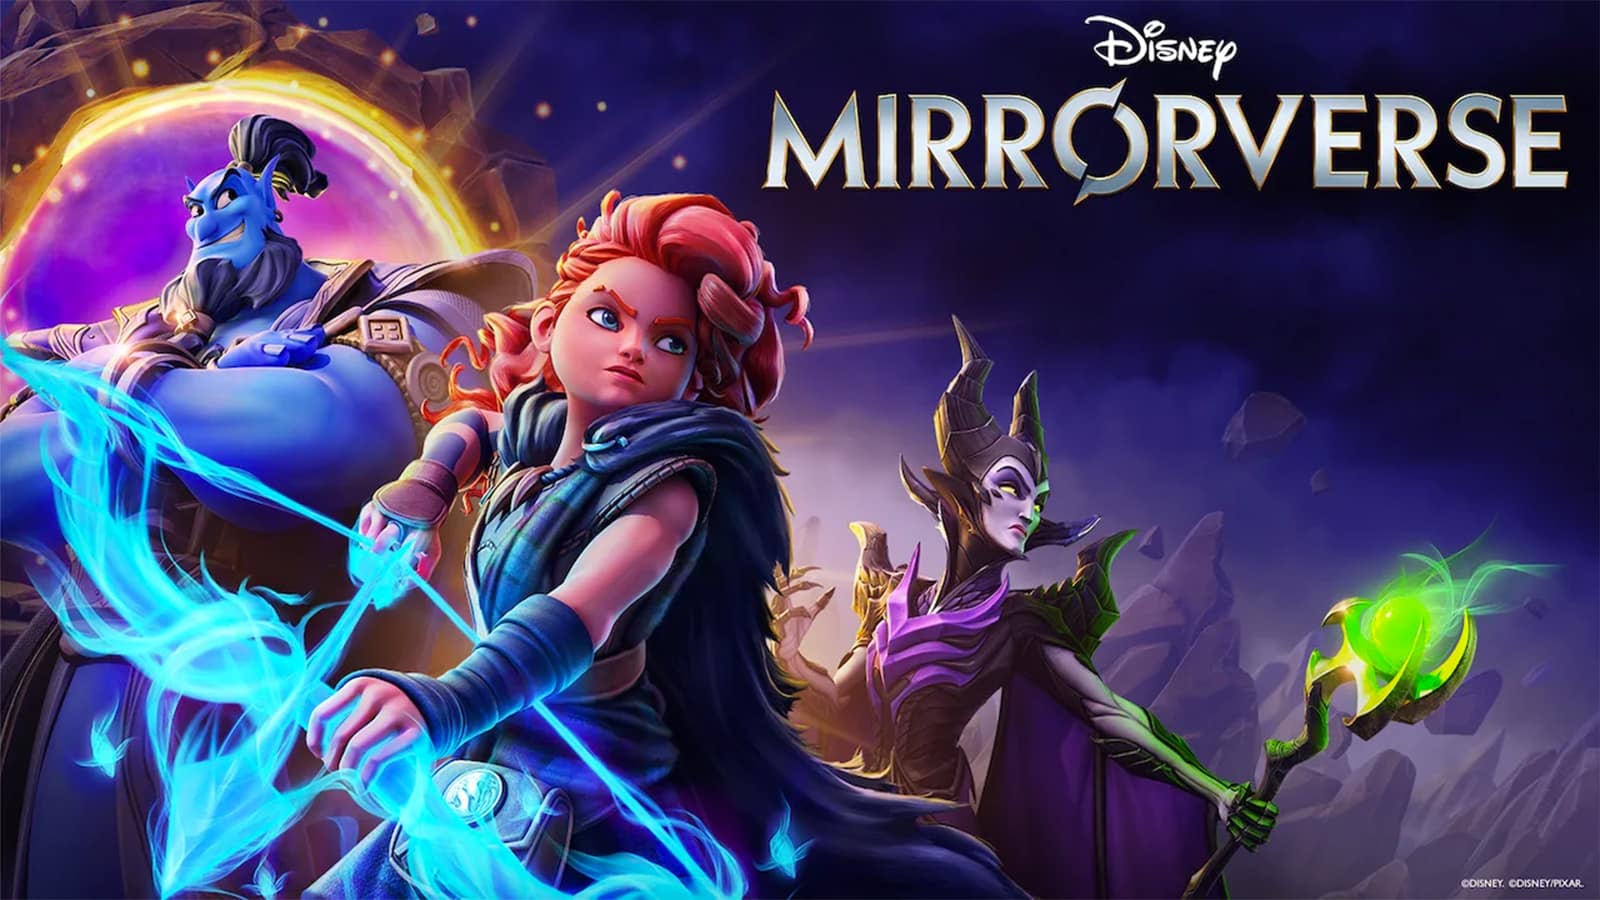 An official promotional image for Mirrorverse.